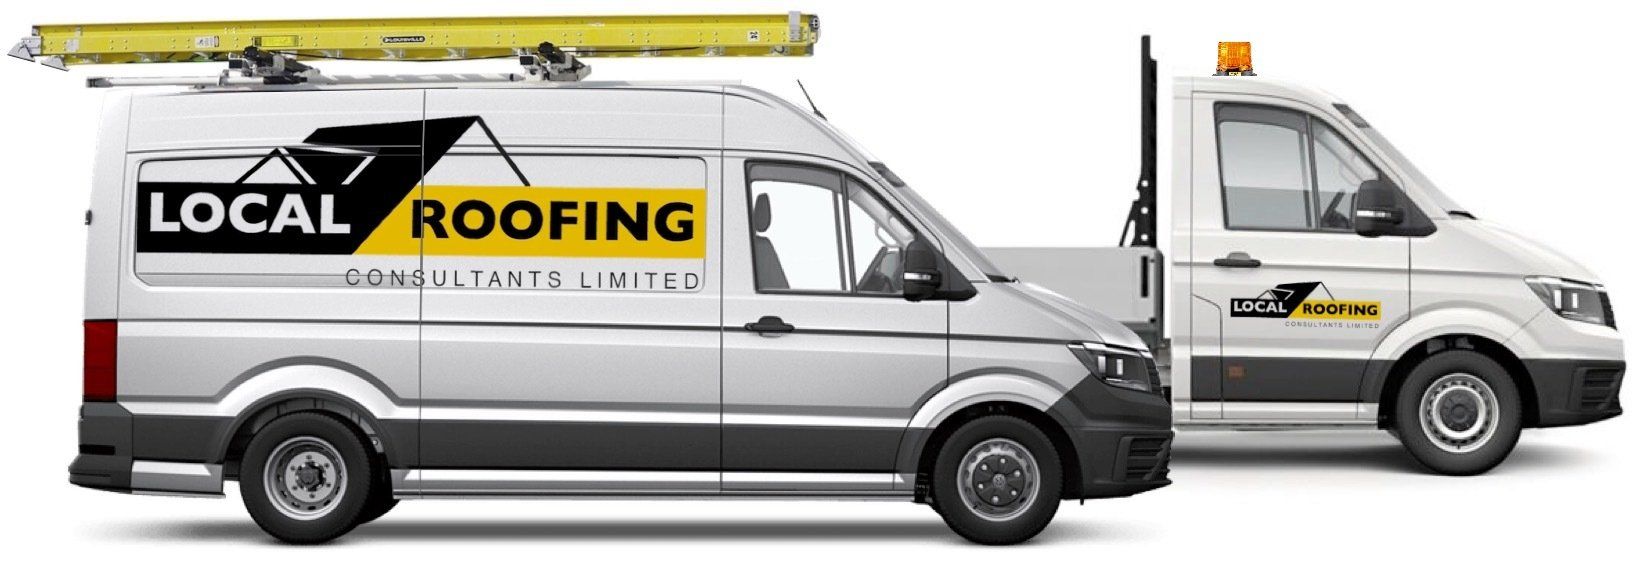 Local Roofing Consultants Limited work in St John’s Wood and throughout the London area